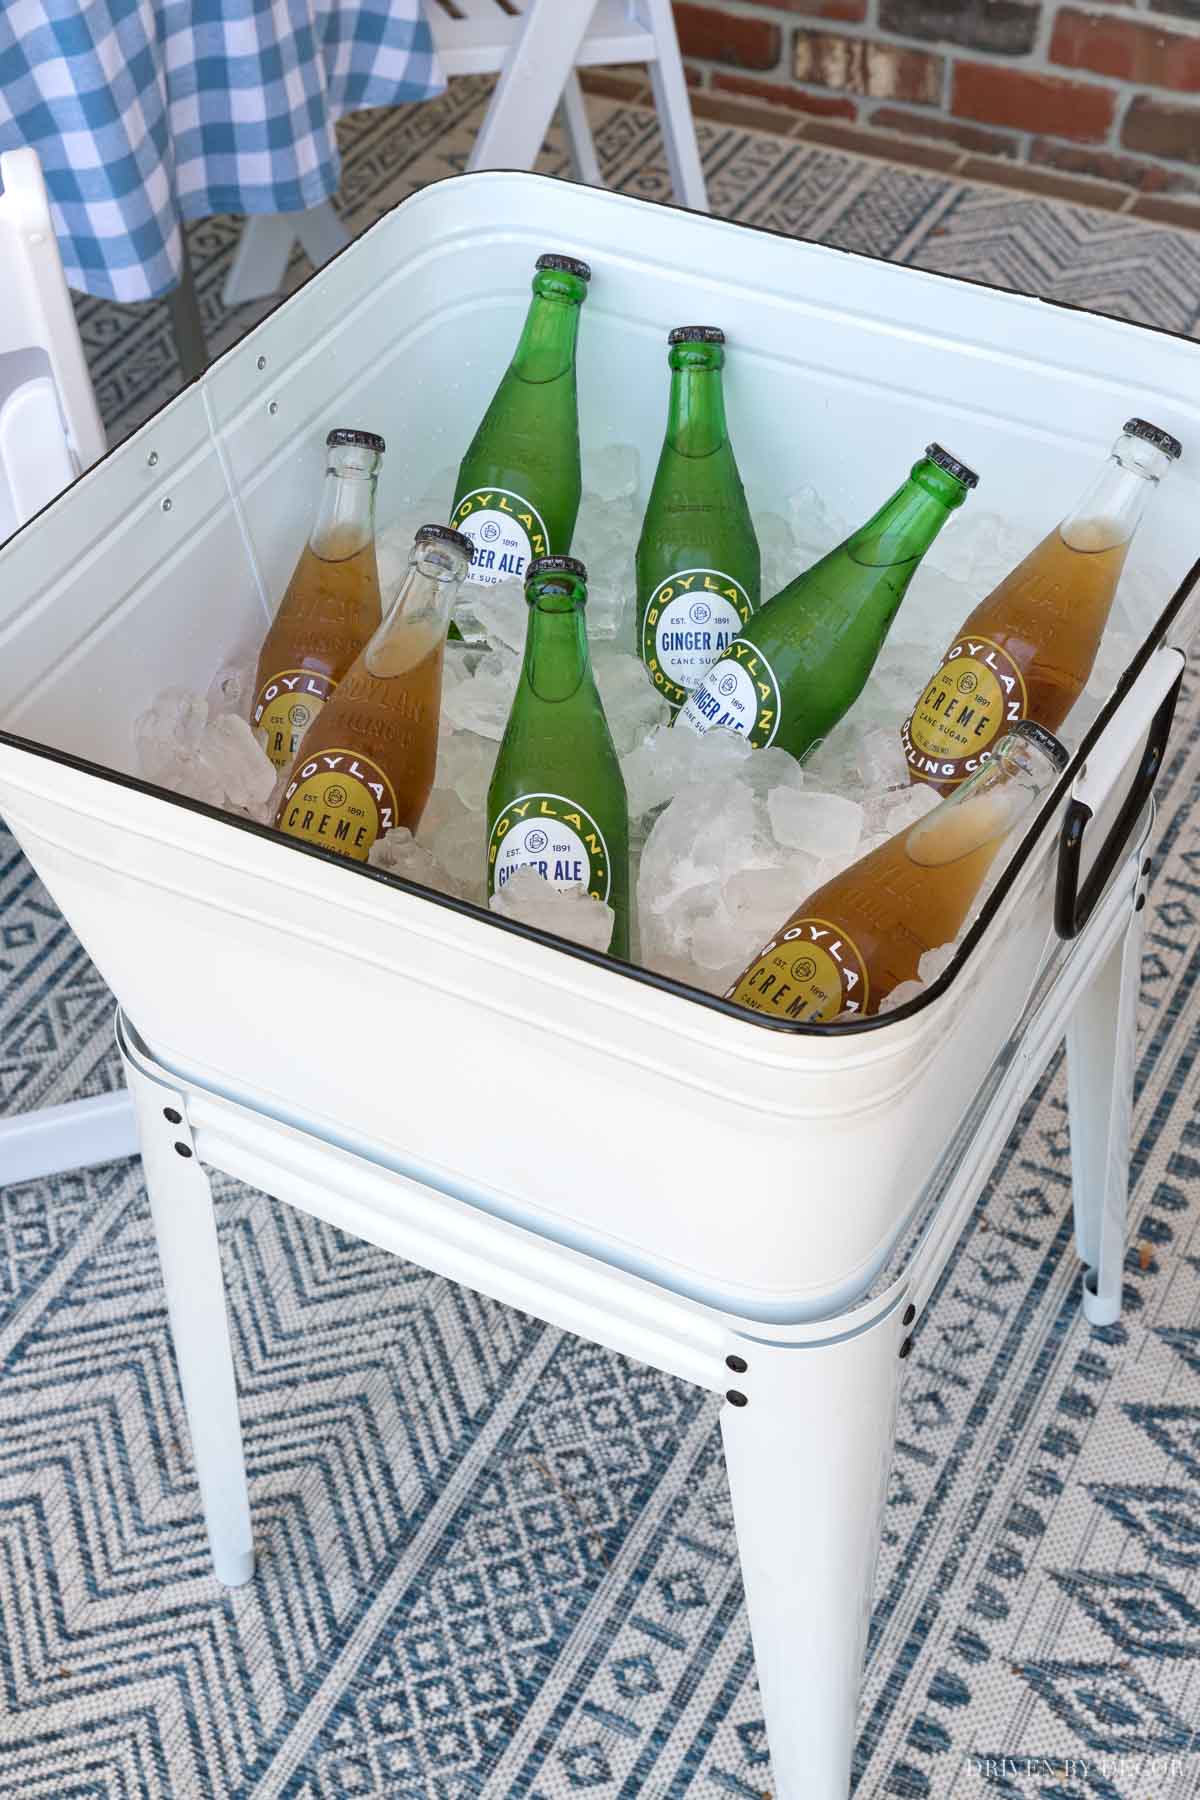 LOVE this elevated planter she uses as a drink cooler!